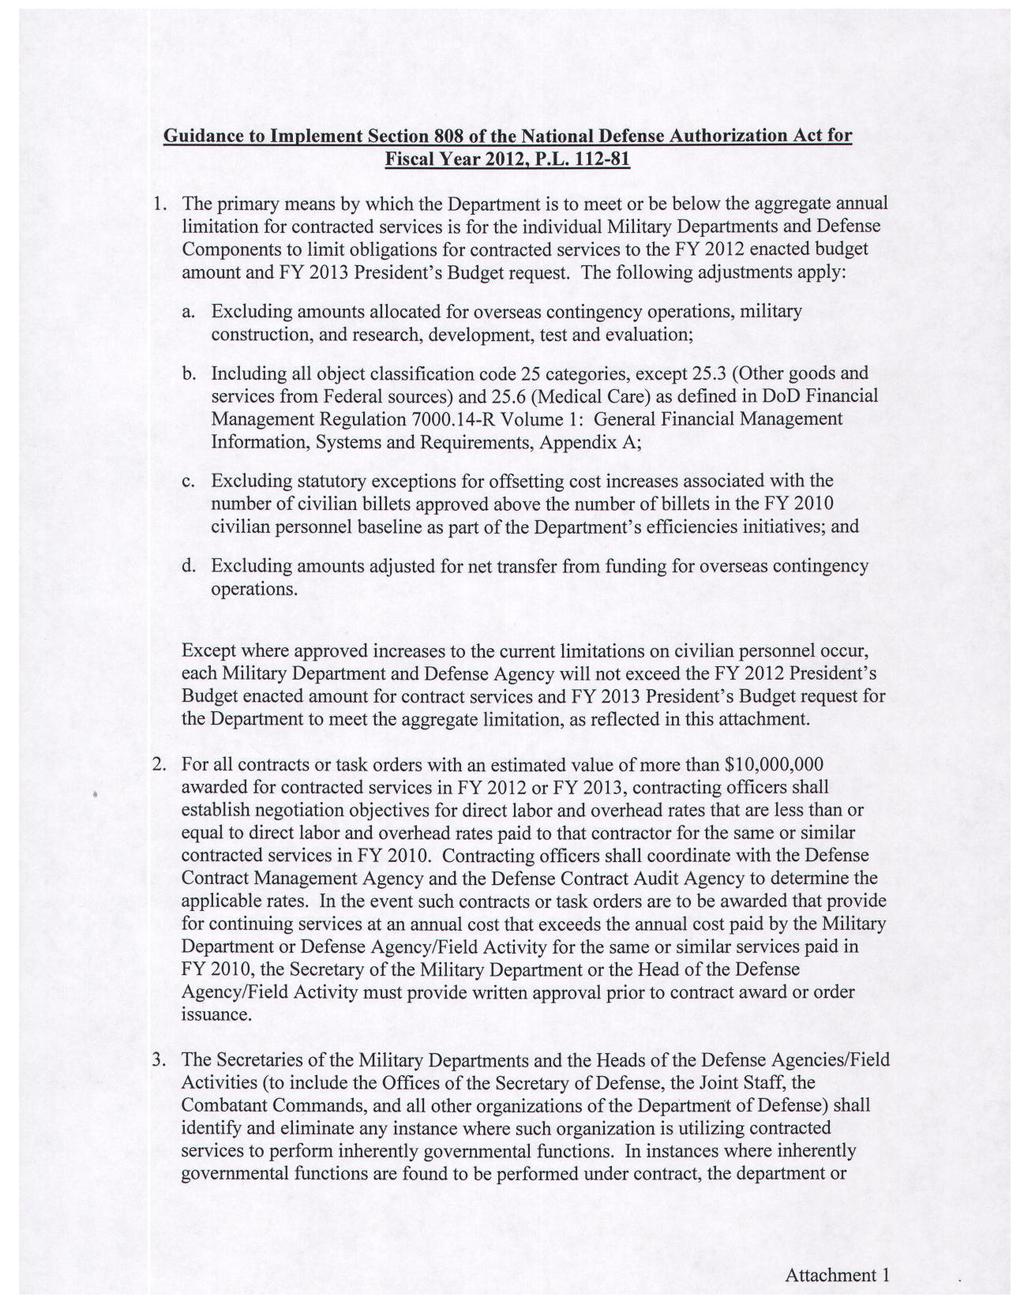 Guidance to Implement Section 808 of the National Defense Authorization Act for Fiscal Year 2012, P.L. 112-81 t.